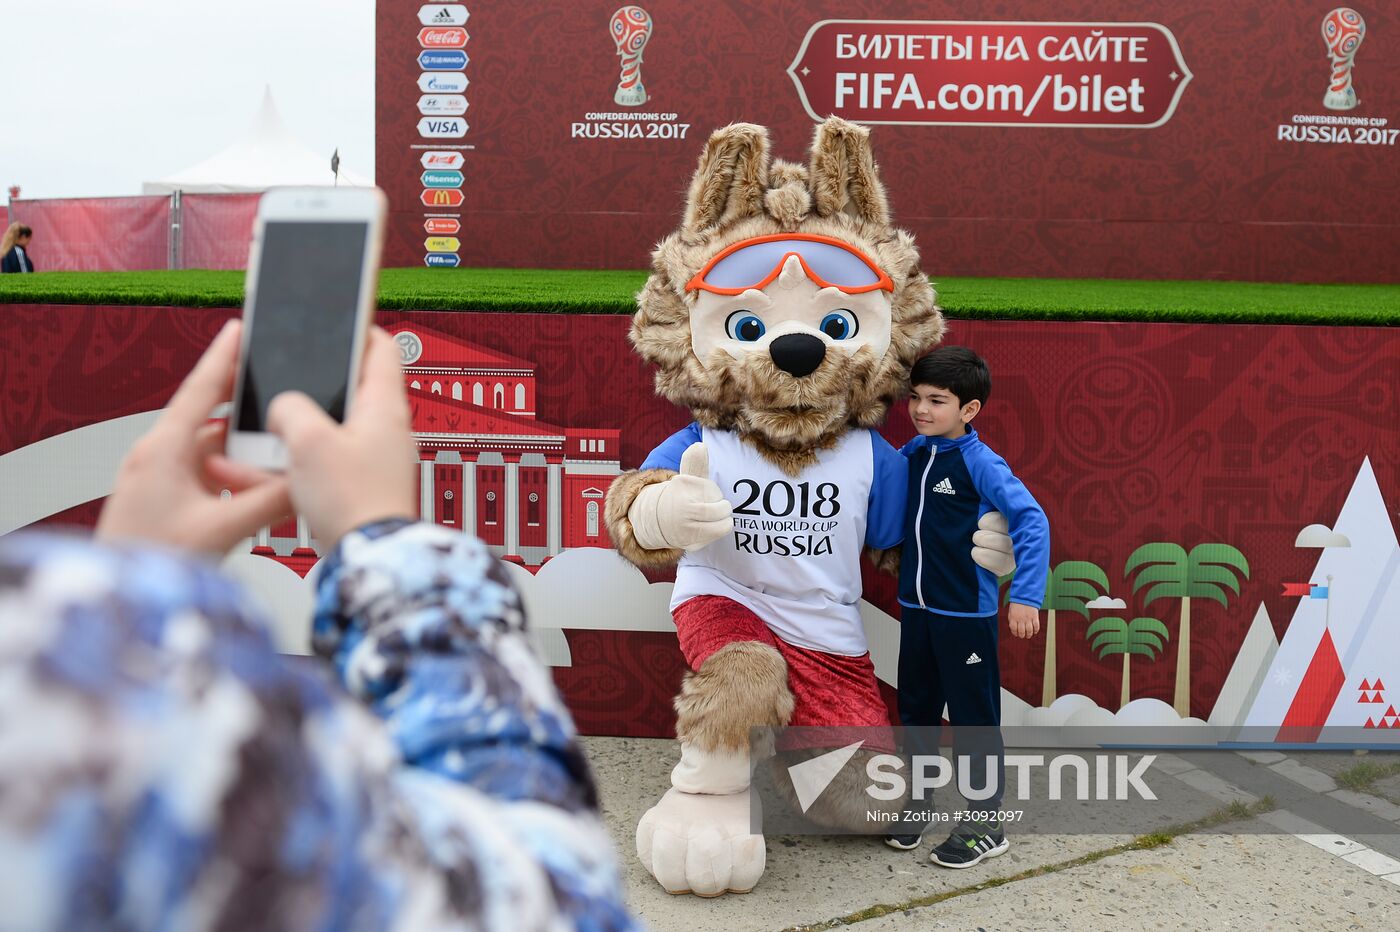 2017 Confederations Cup Park opened in Sochi